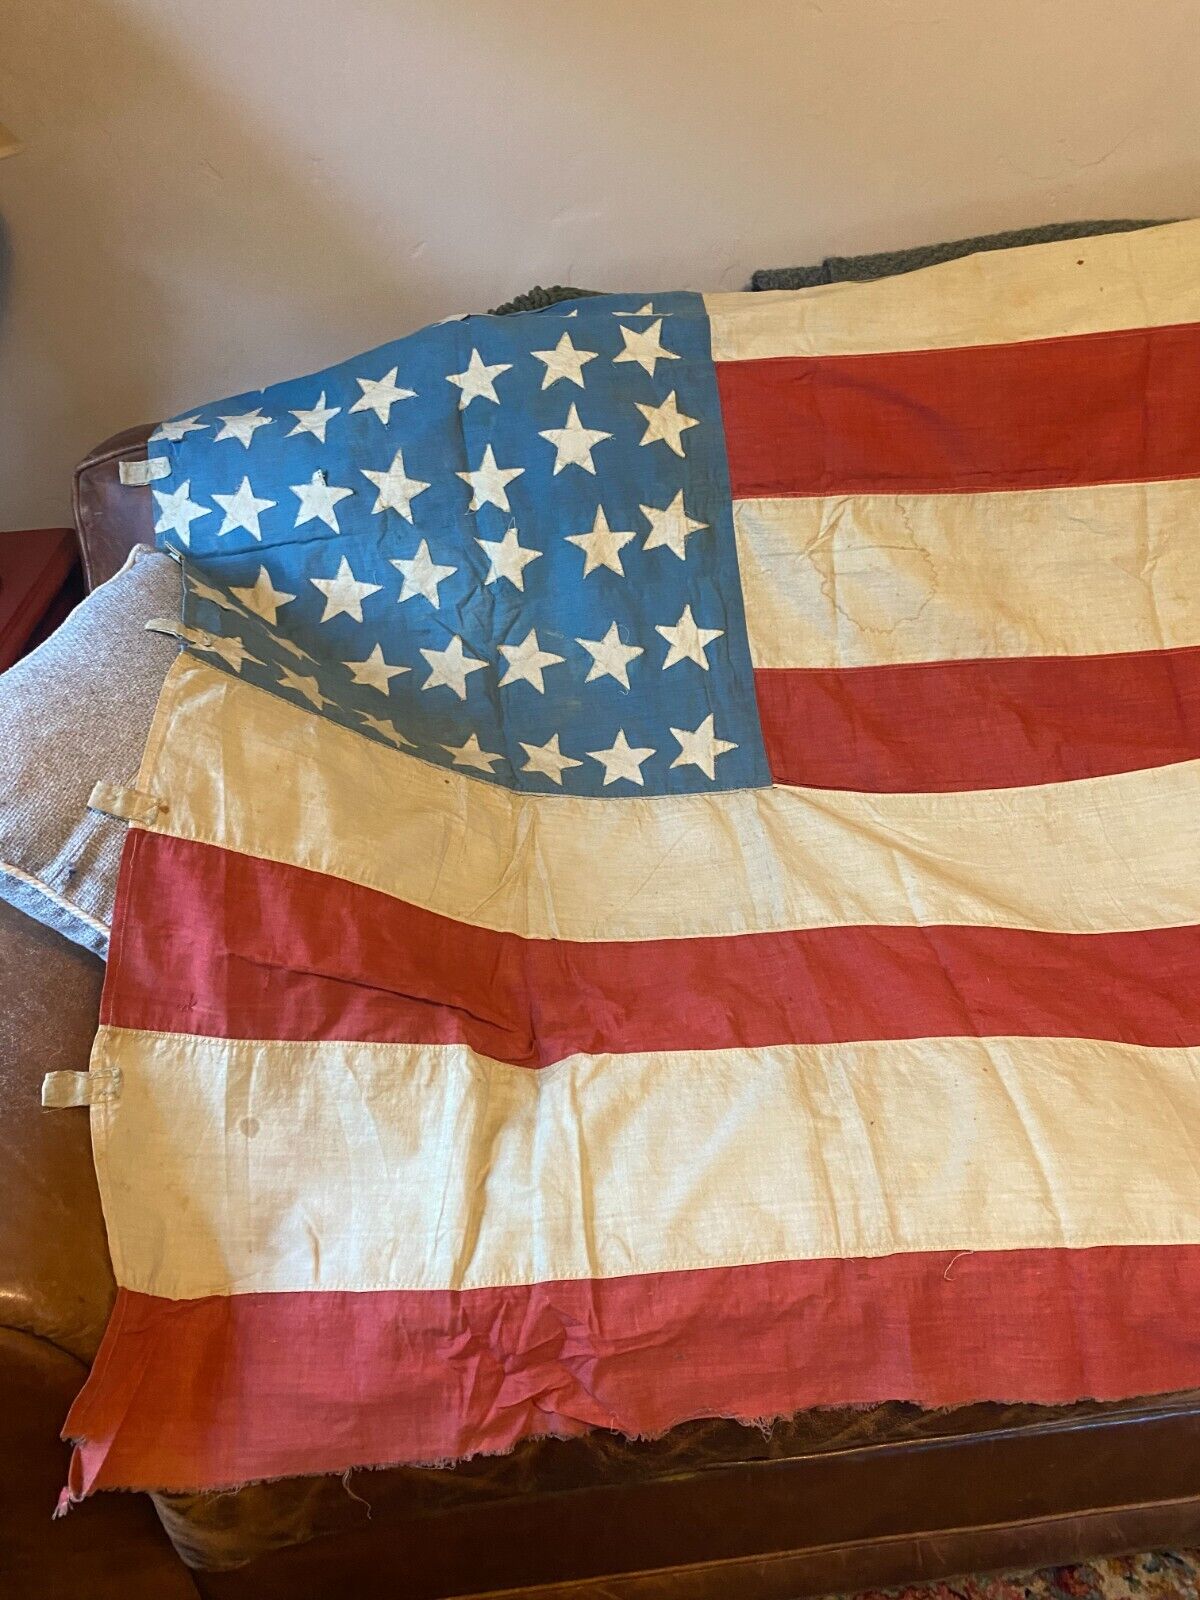 42 Star American Flag  - Antique Circa 1890.  One family owner.